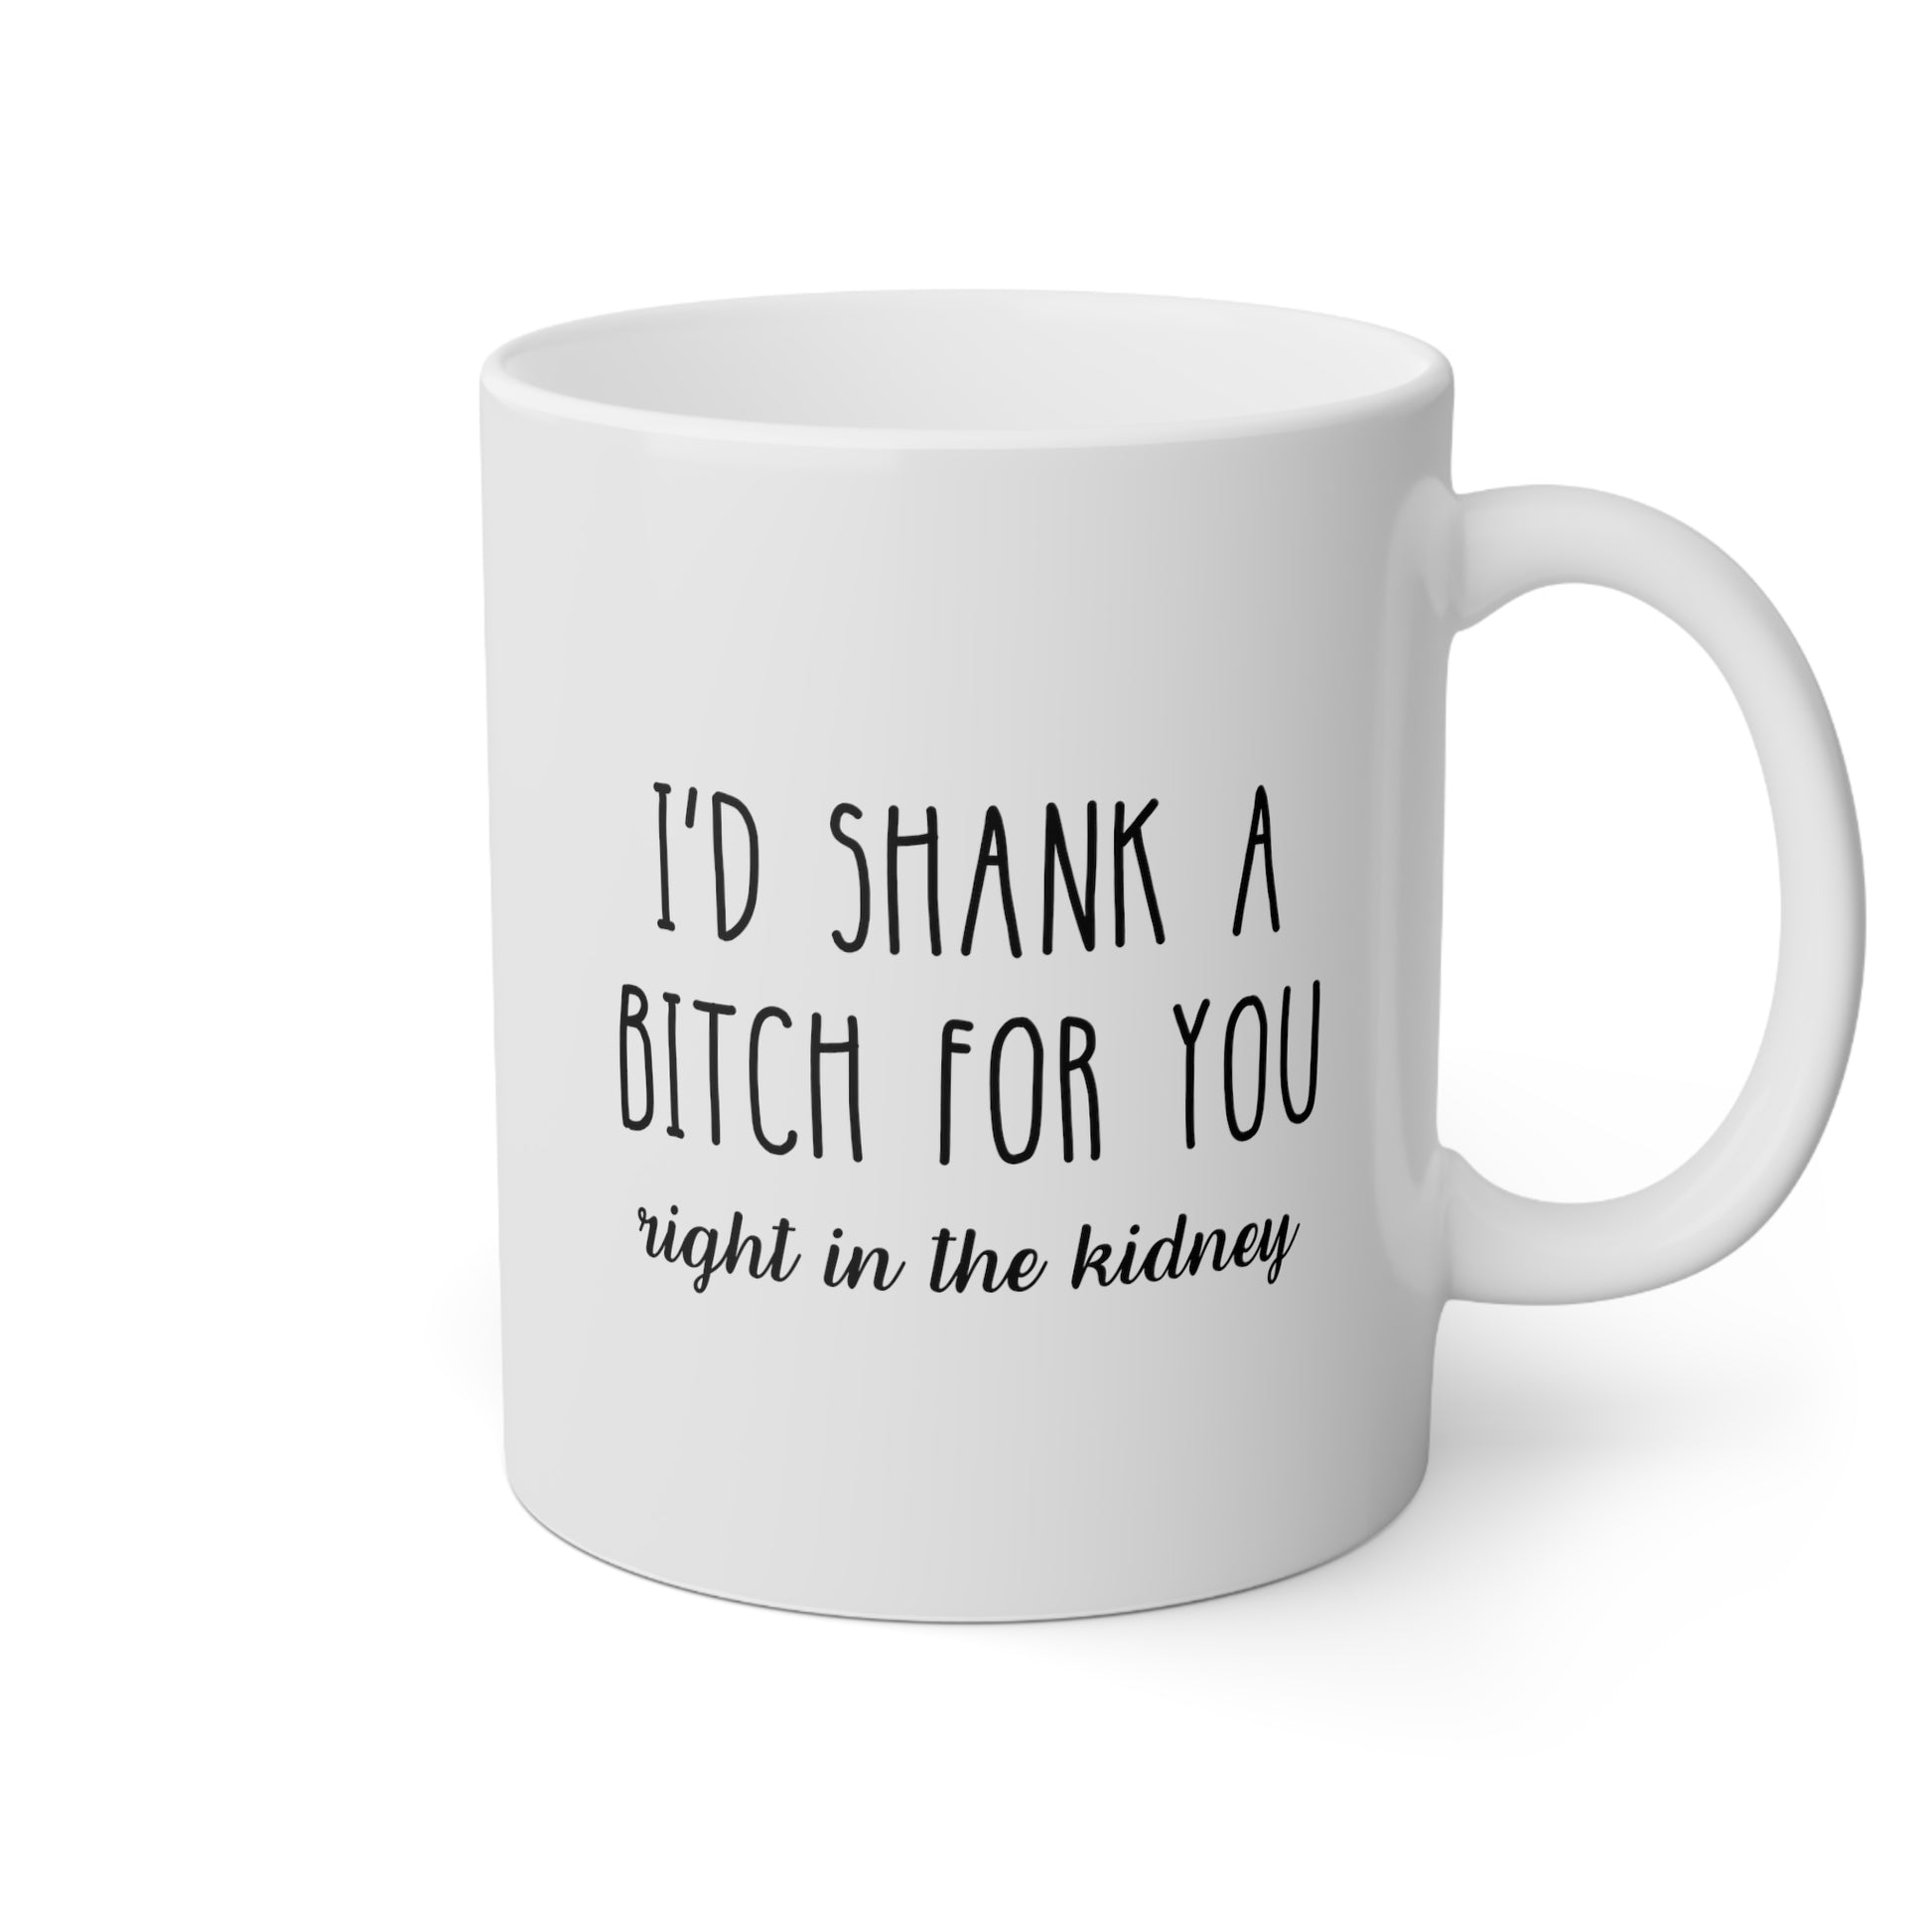 I'd Shank A Bitch For You 11oz white funny large coffee mug gift for best friend sarcastic friendship BFF dumb rude right in the kidney waveywares wavey wares wavywares wavy wares